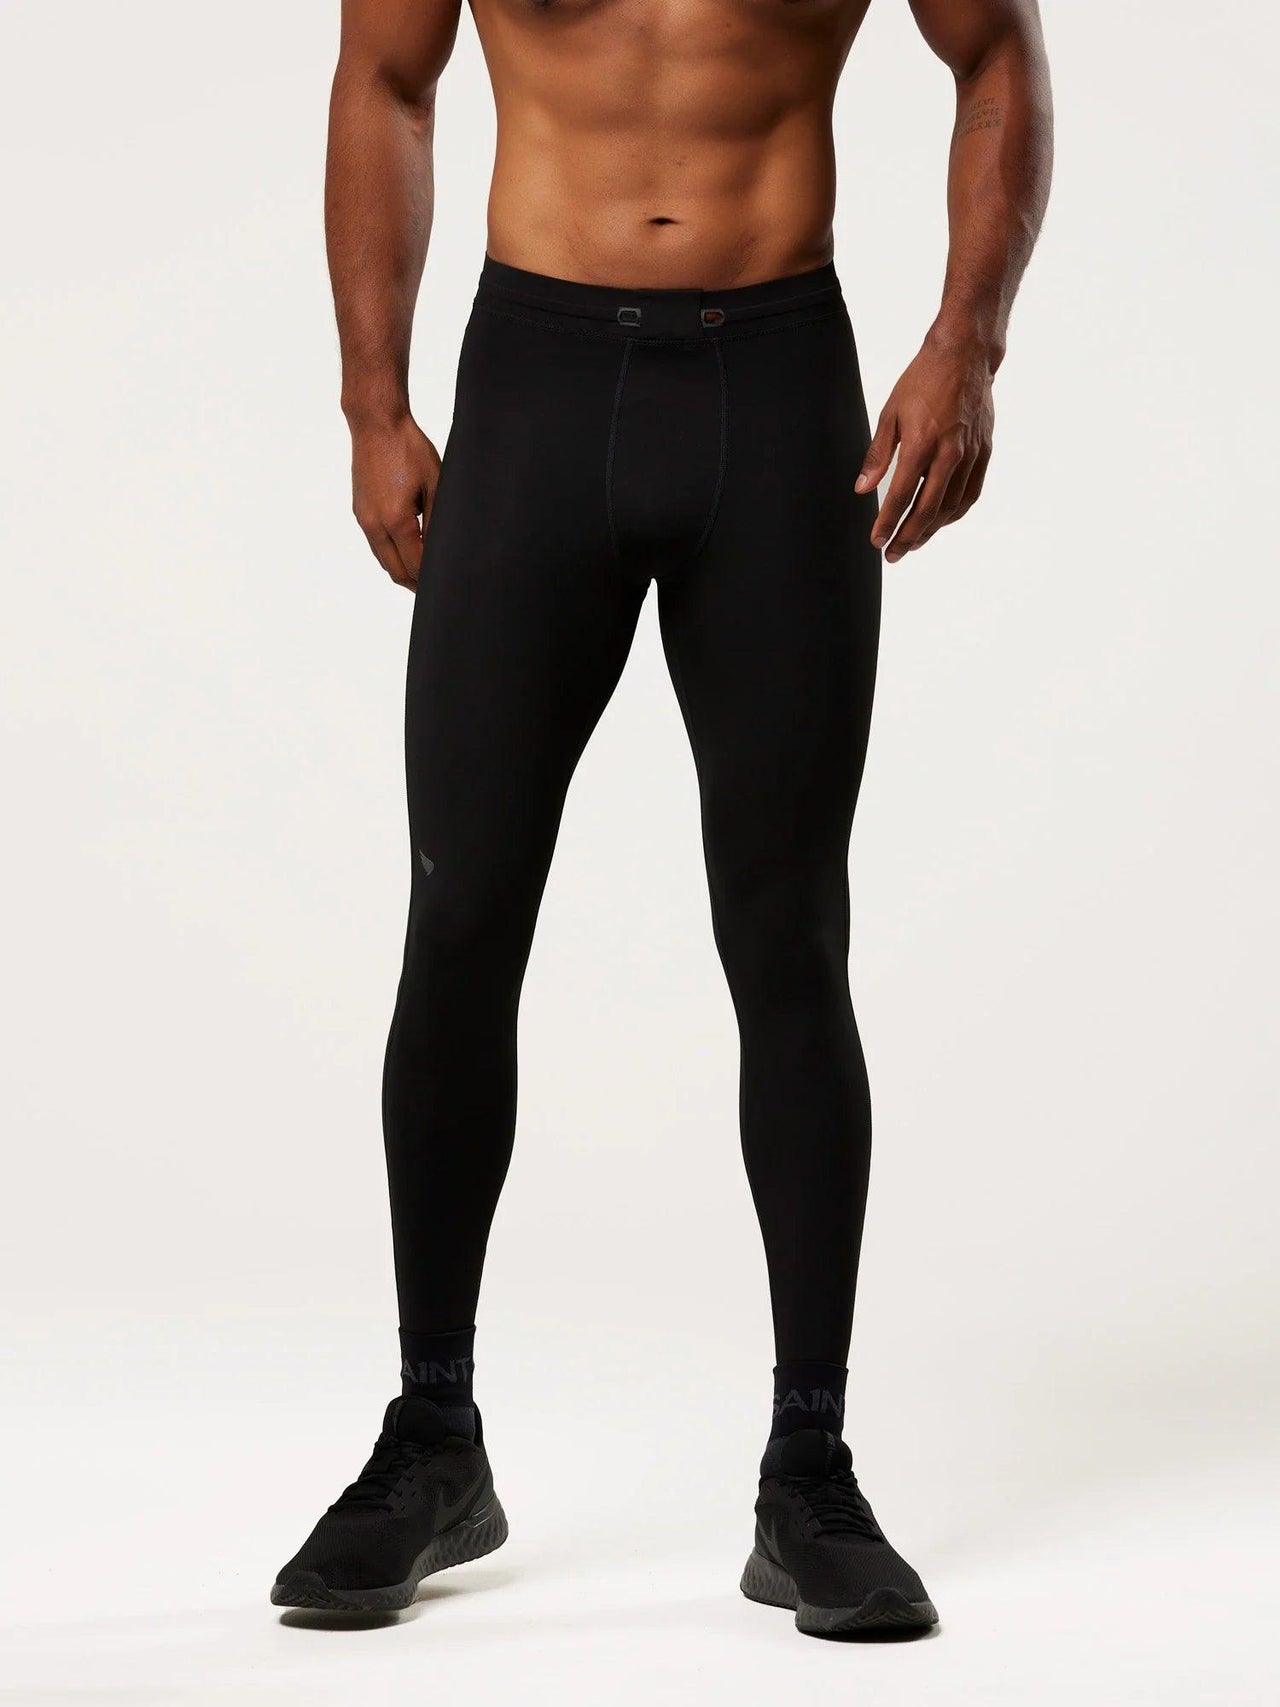 Men's 3/4 Compression Tights For Performance & Recovery